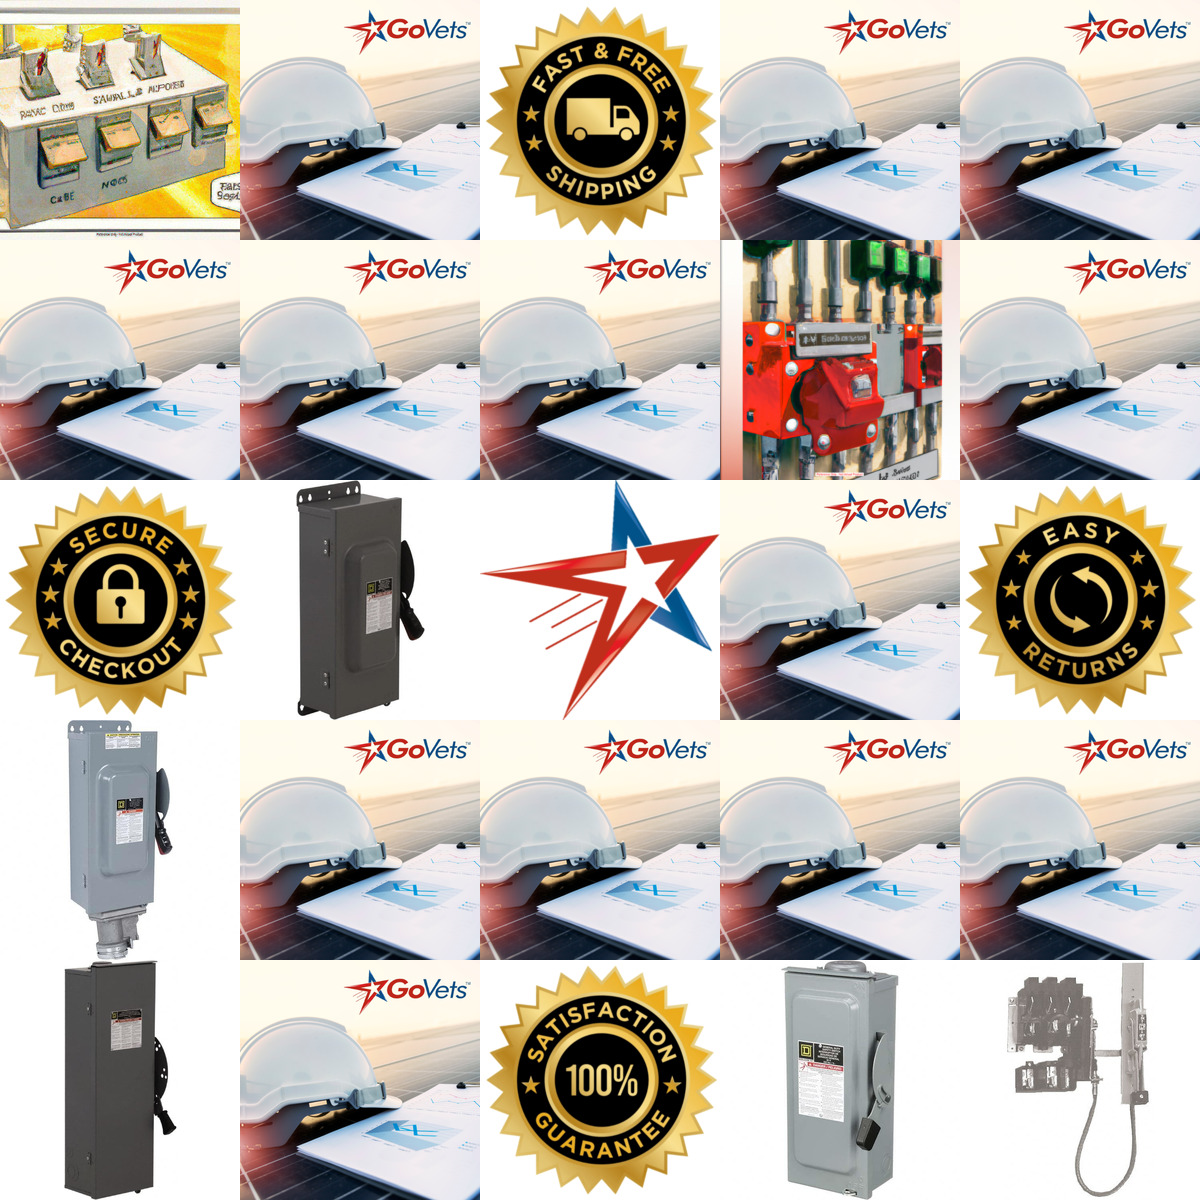 A selection of Safety and Disconnect Switches products on GoVets